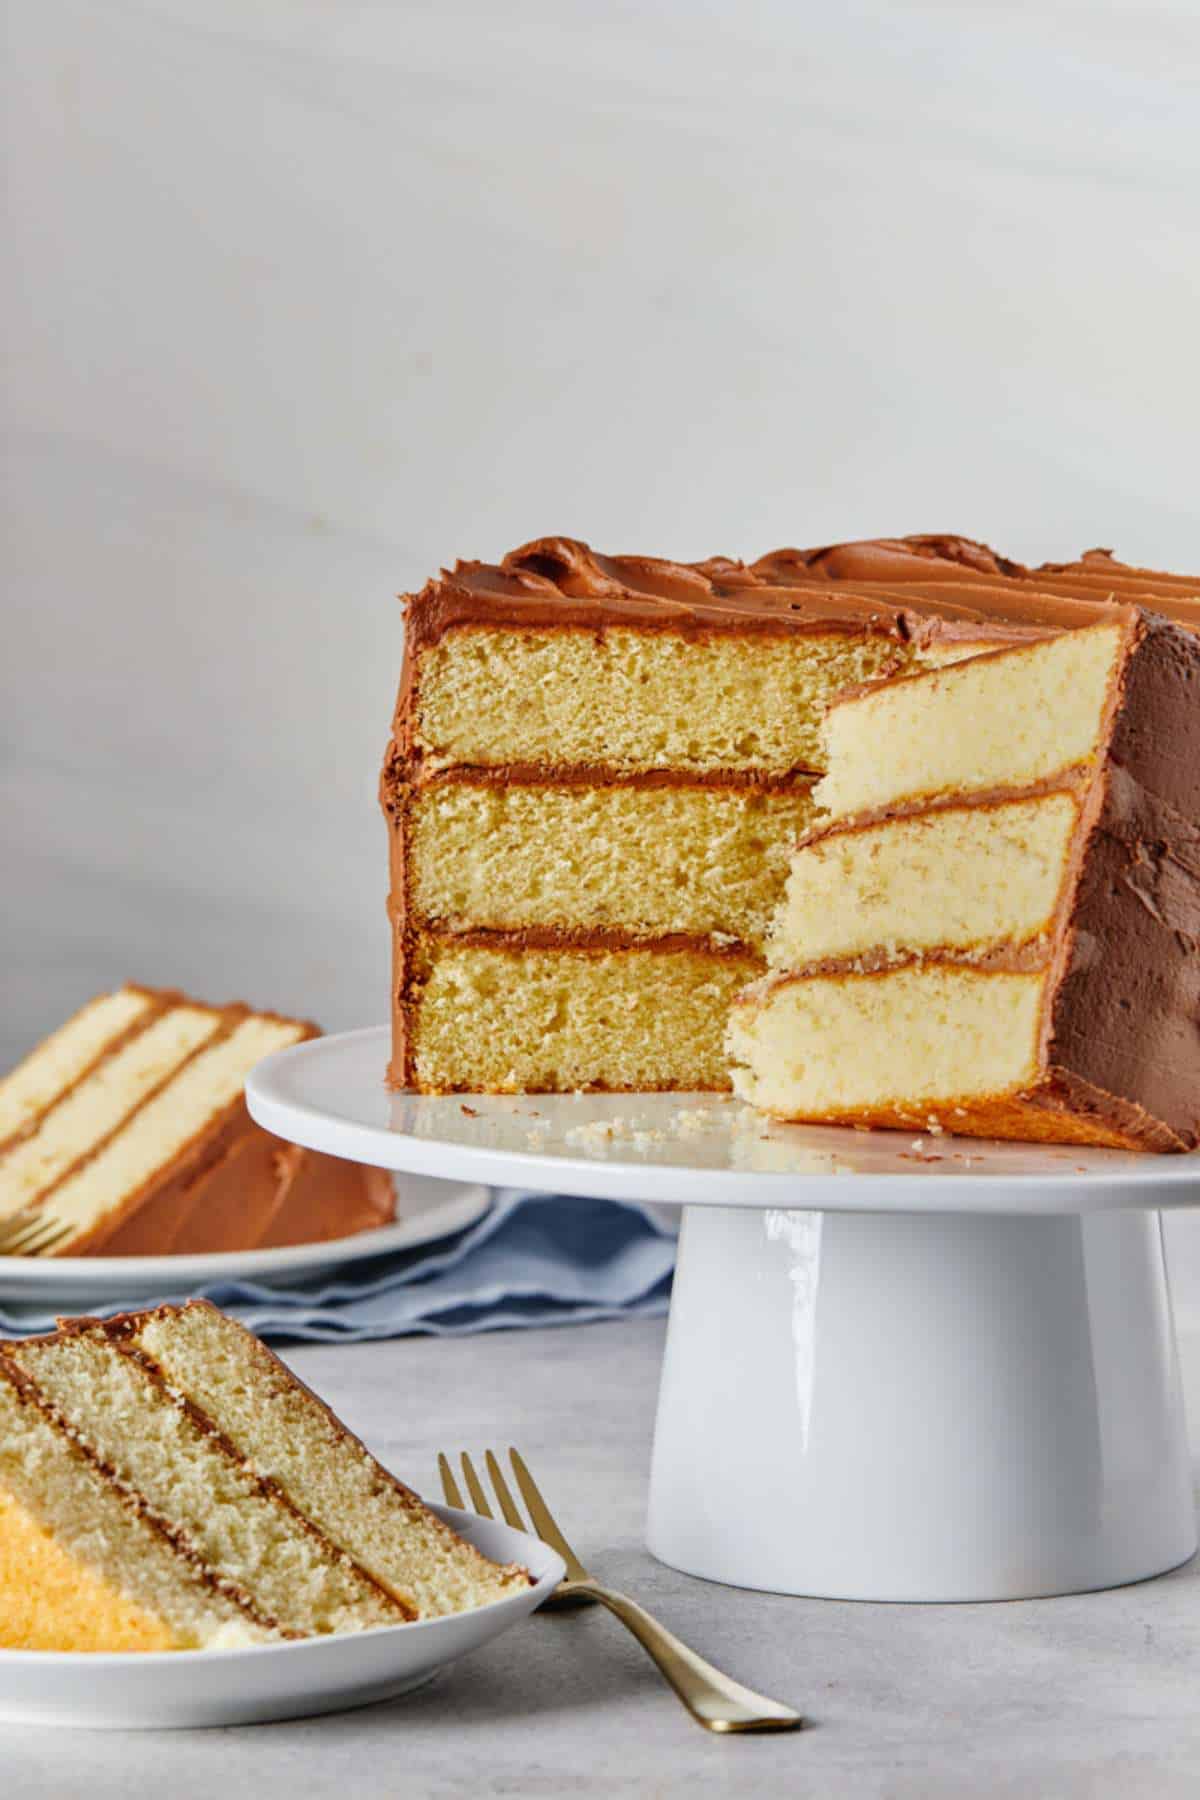 A yellow cake with chocolate frosting on a white cake stand with pieces missing and a slice on a plate in the front with a fork beside the plate.